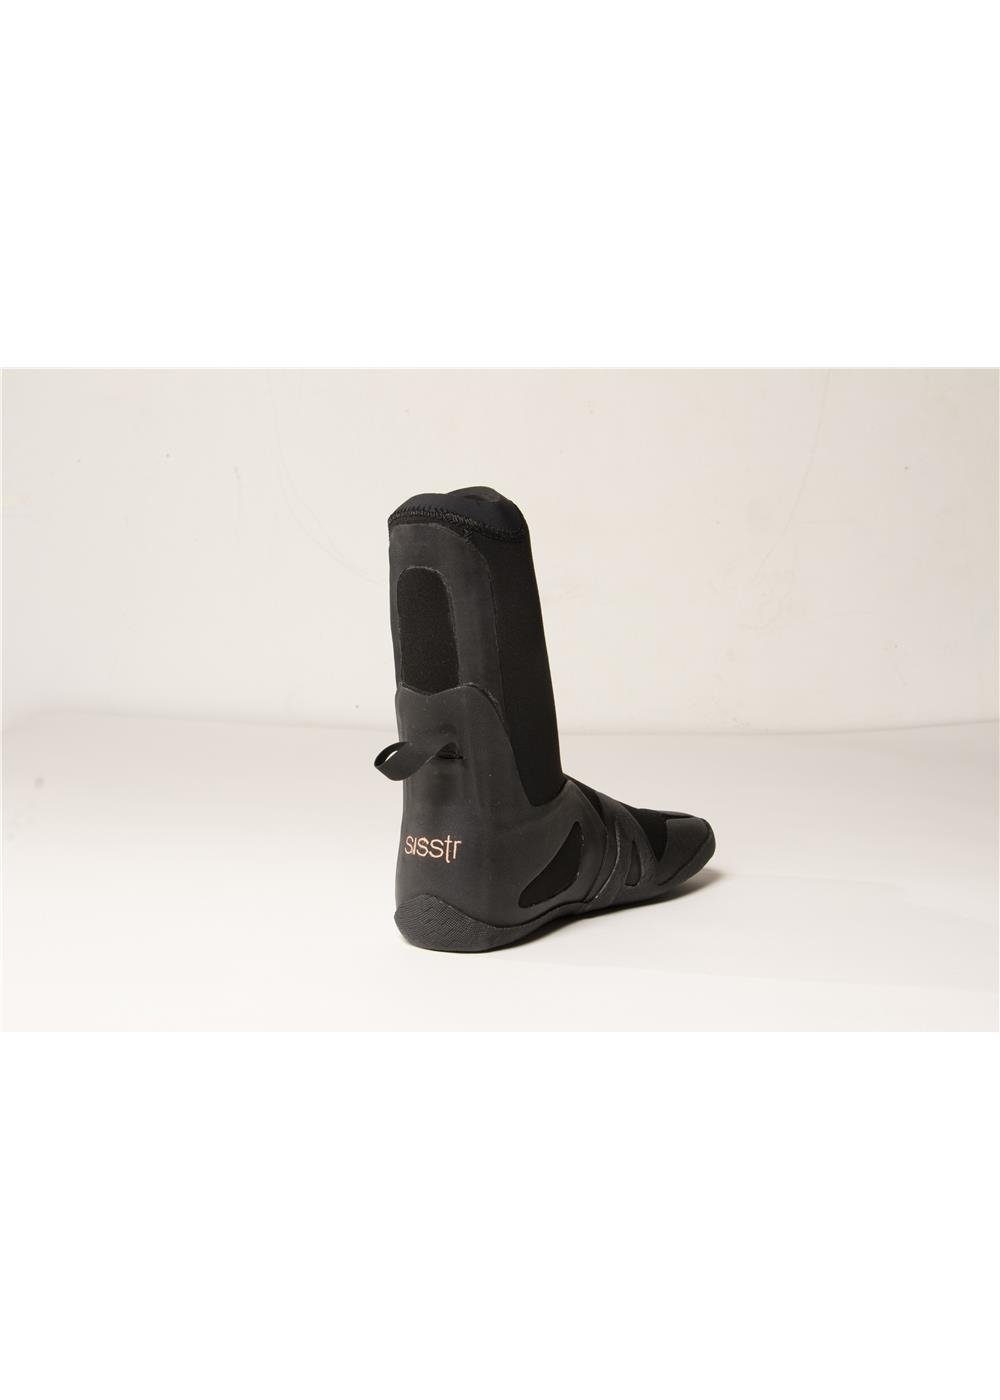 Girls 5mm Closed Toe Wetsuit Bootie.